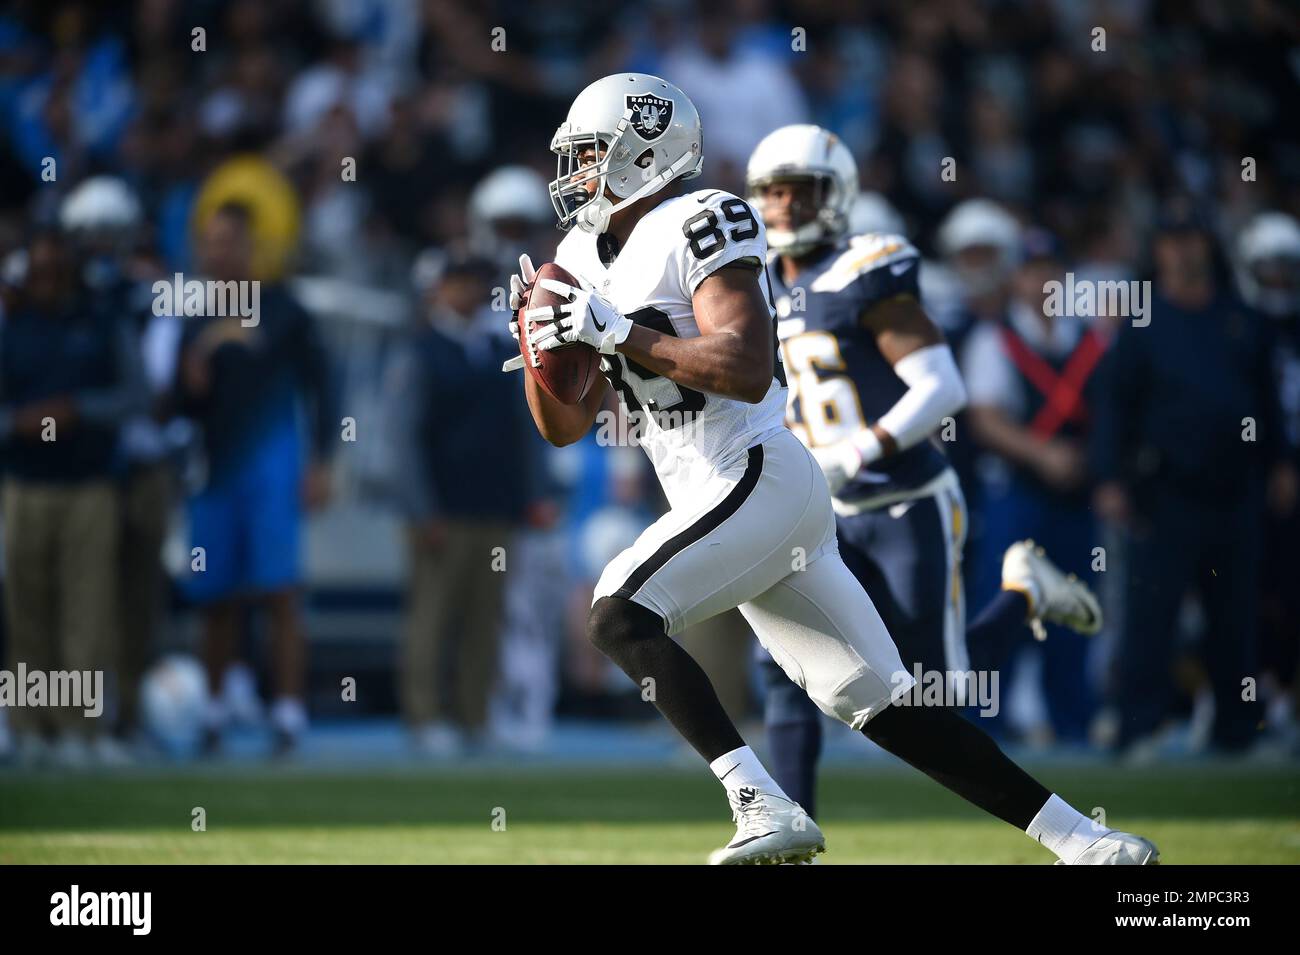 Oakland Raiders wide receiver Amari Cooper hauls in a pass on his